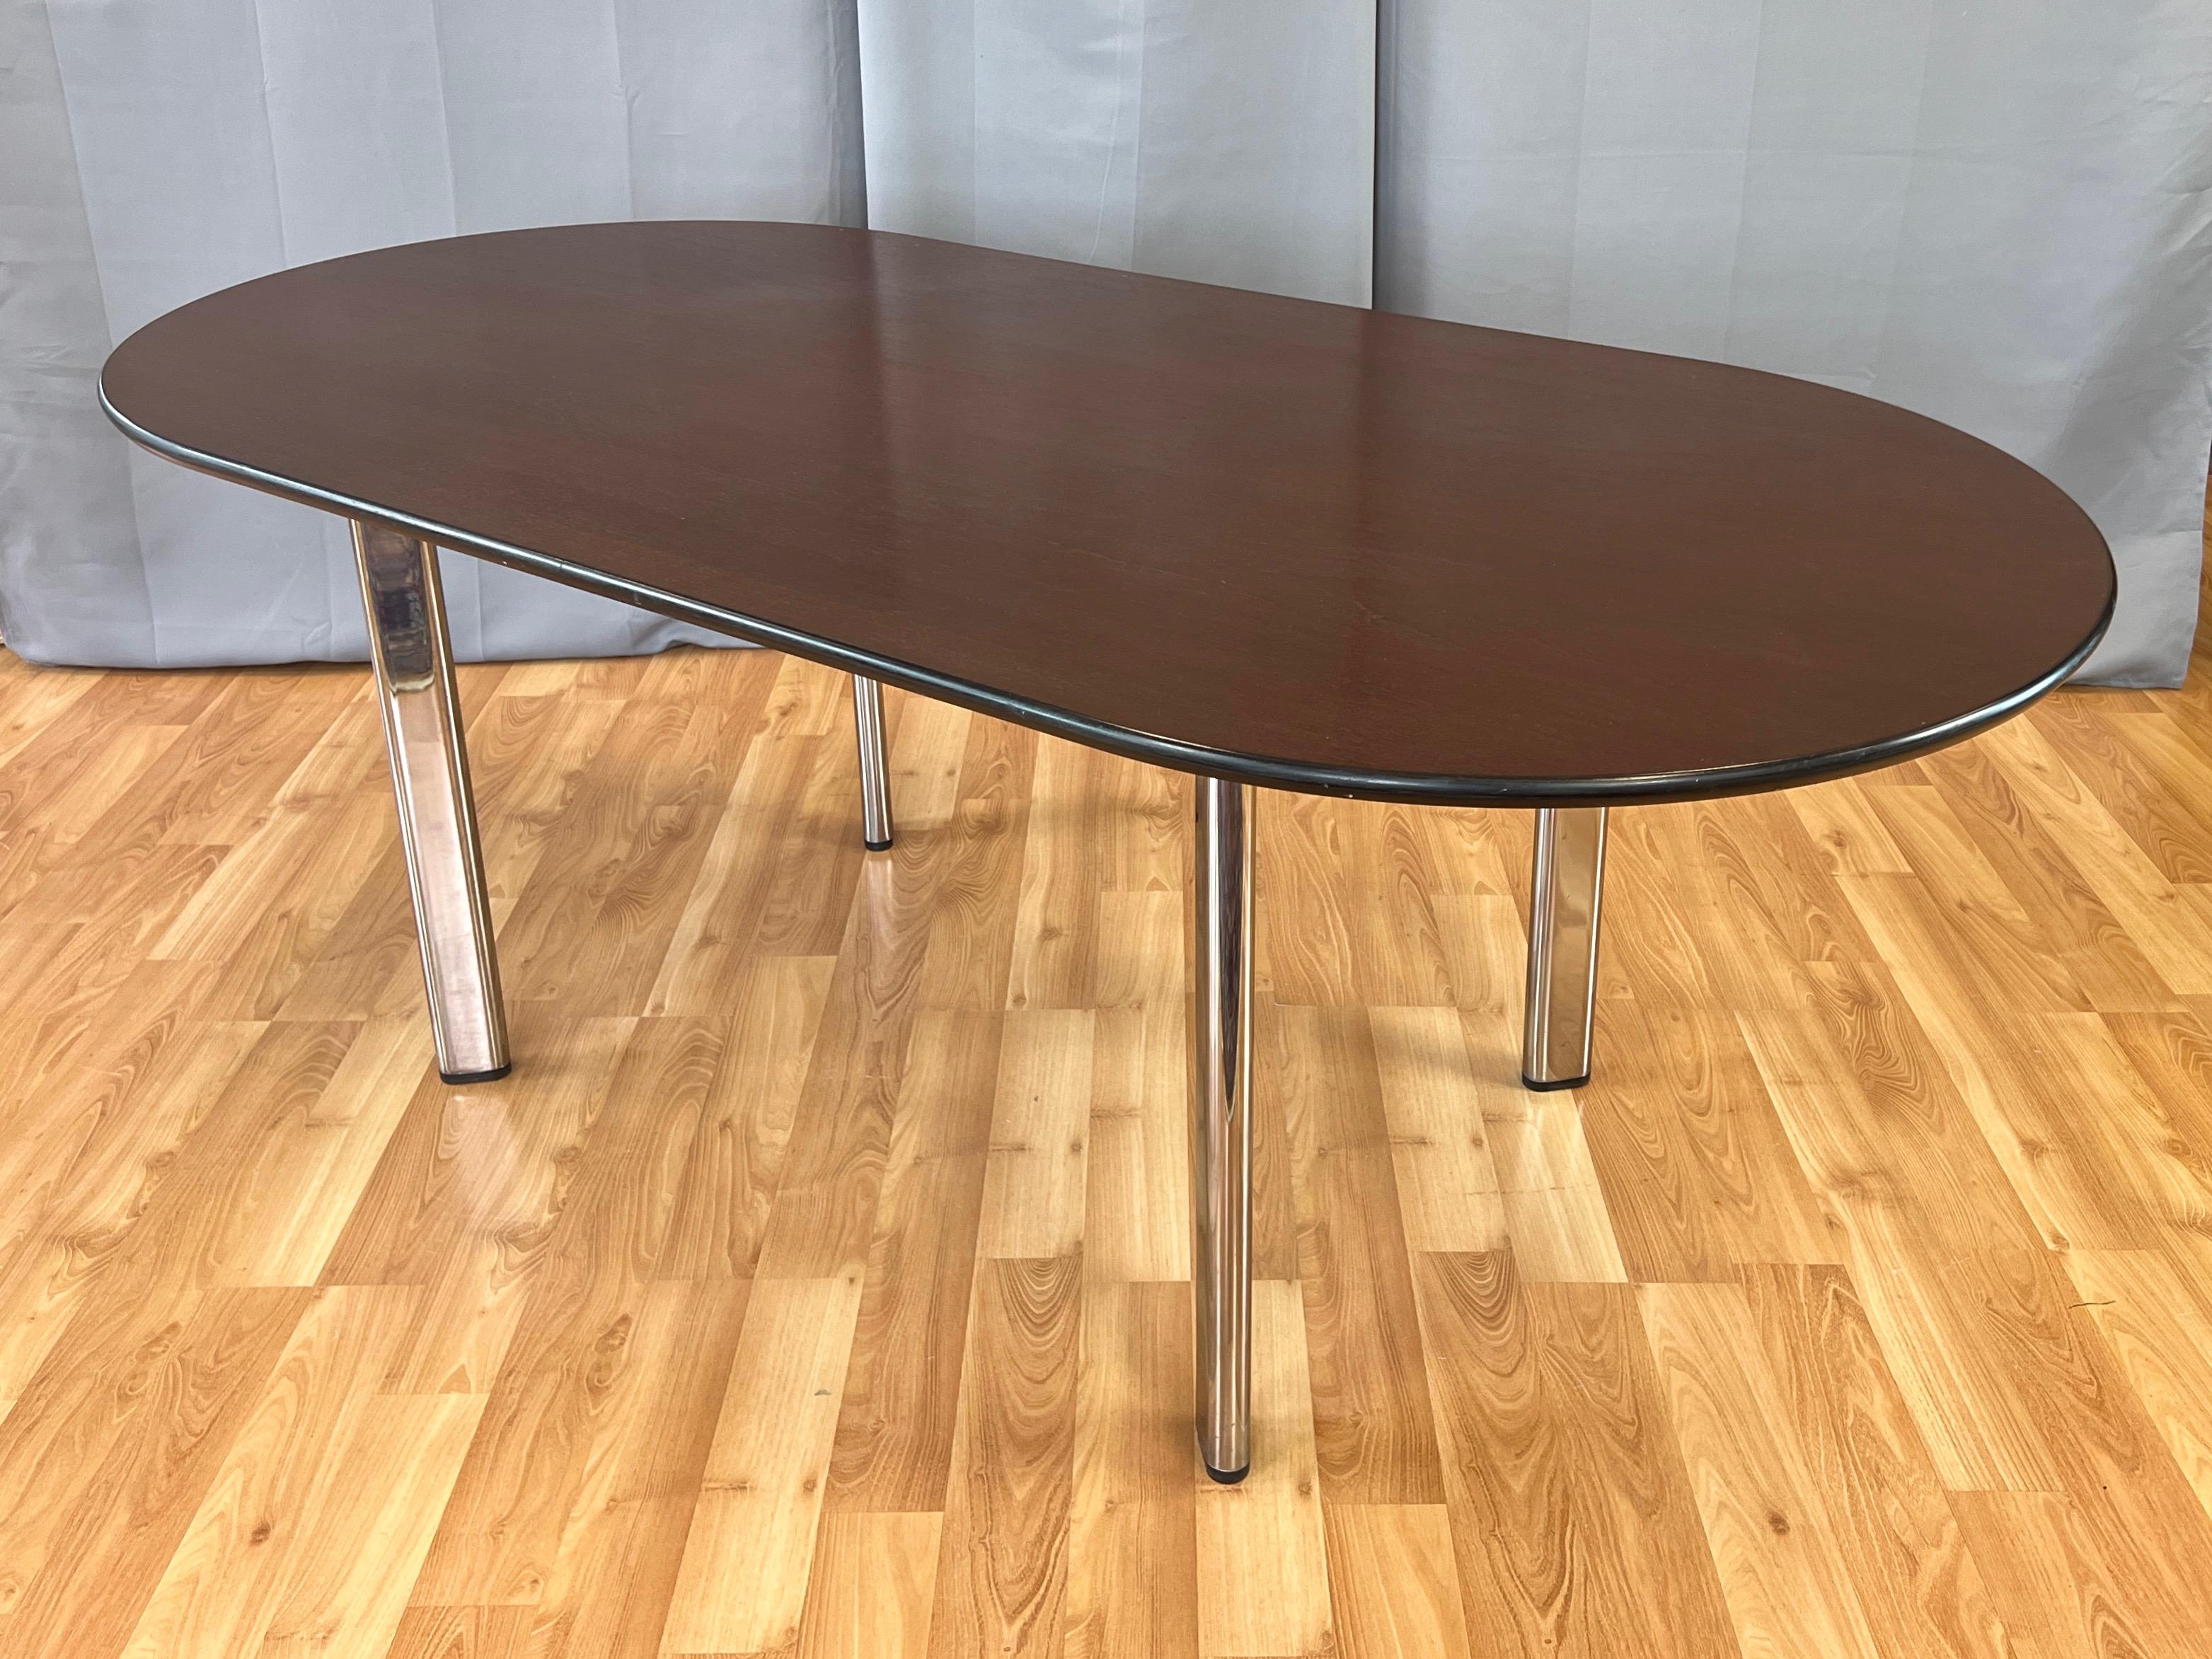 Minimalist Joseph D’Urso for Knoll High Table in American Cherry and Chrome, 1995 For Sale